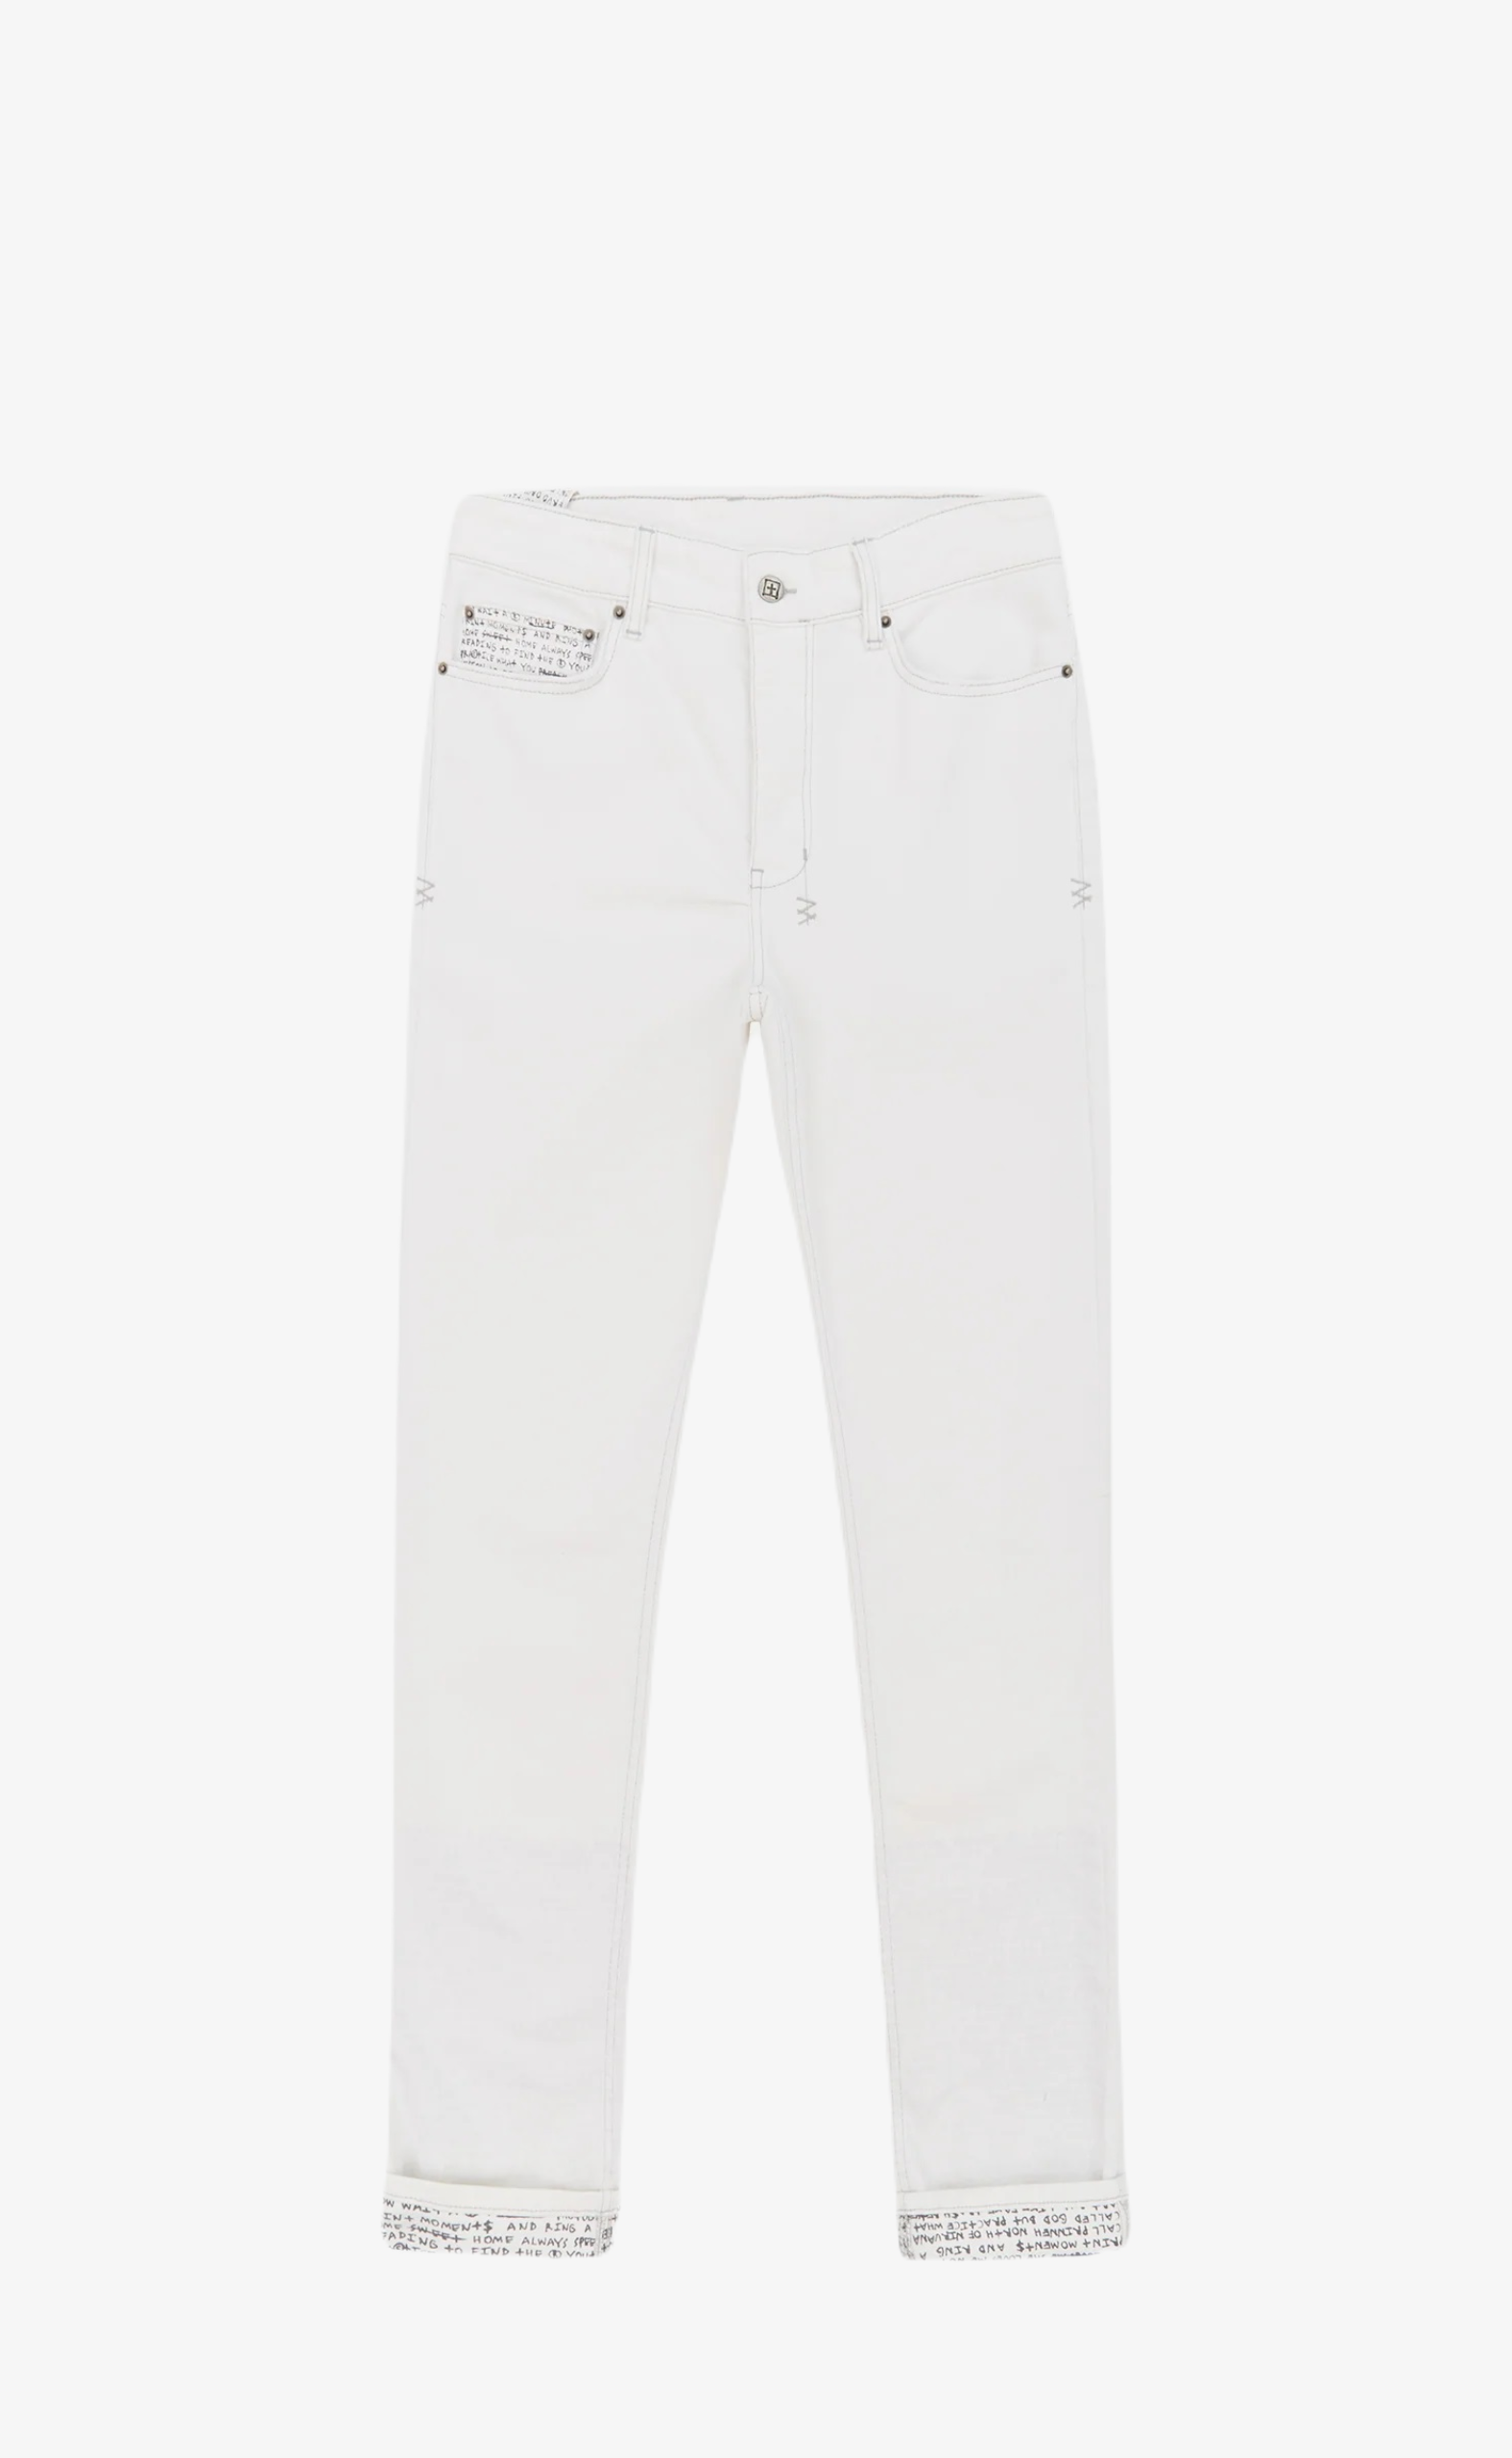 CHITCH NOISE WHITE JEANS